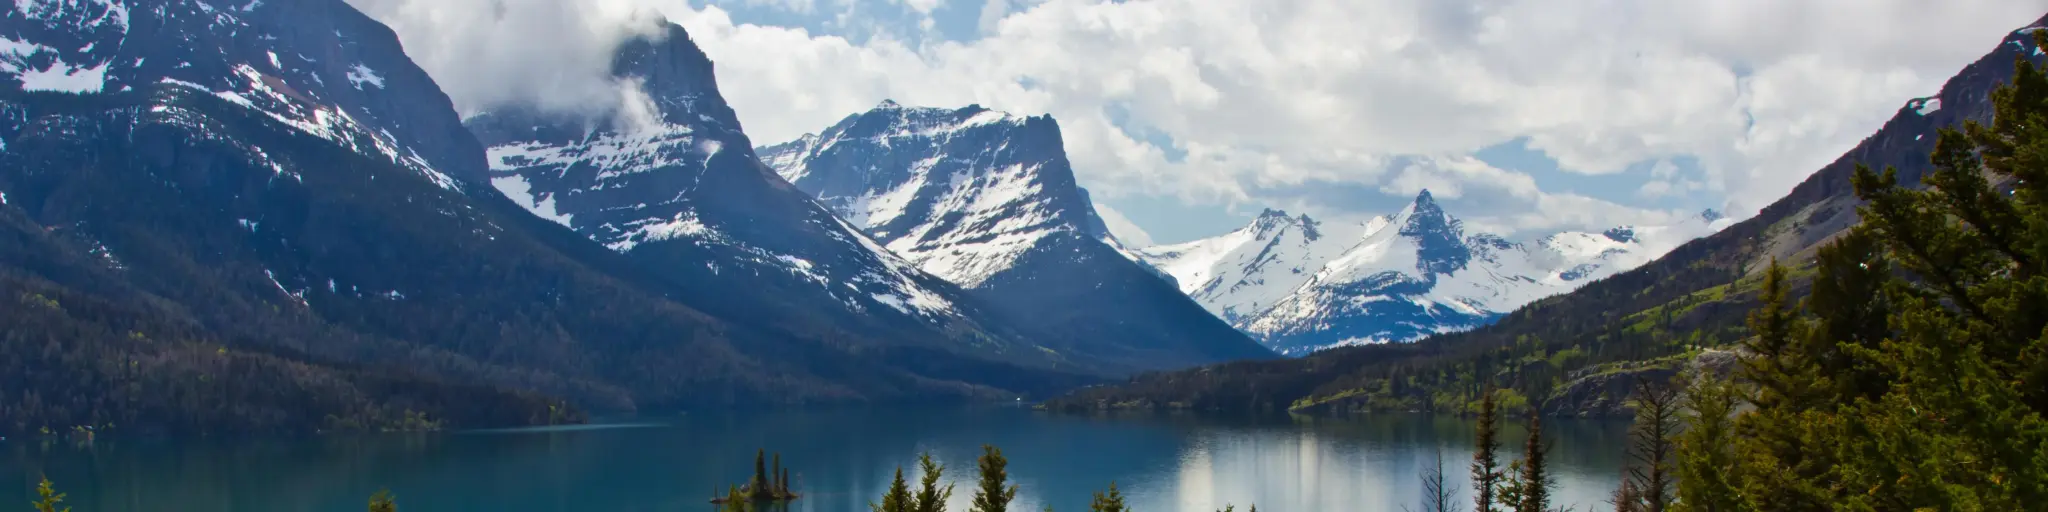 St Mary Lake with snow-capped mountains in the background